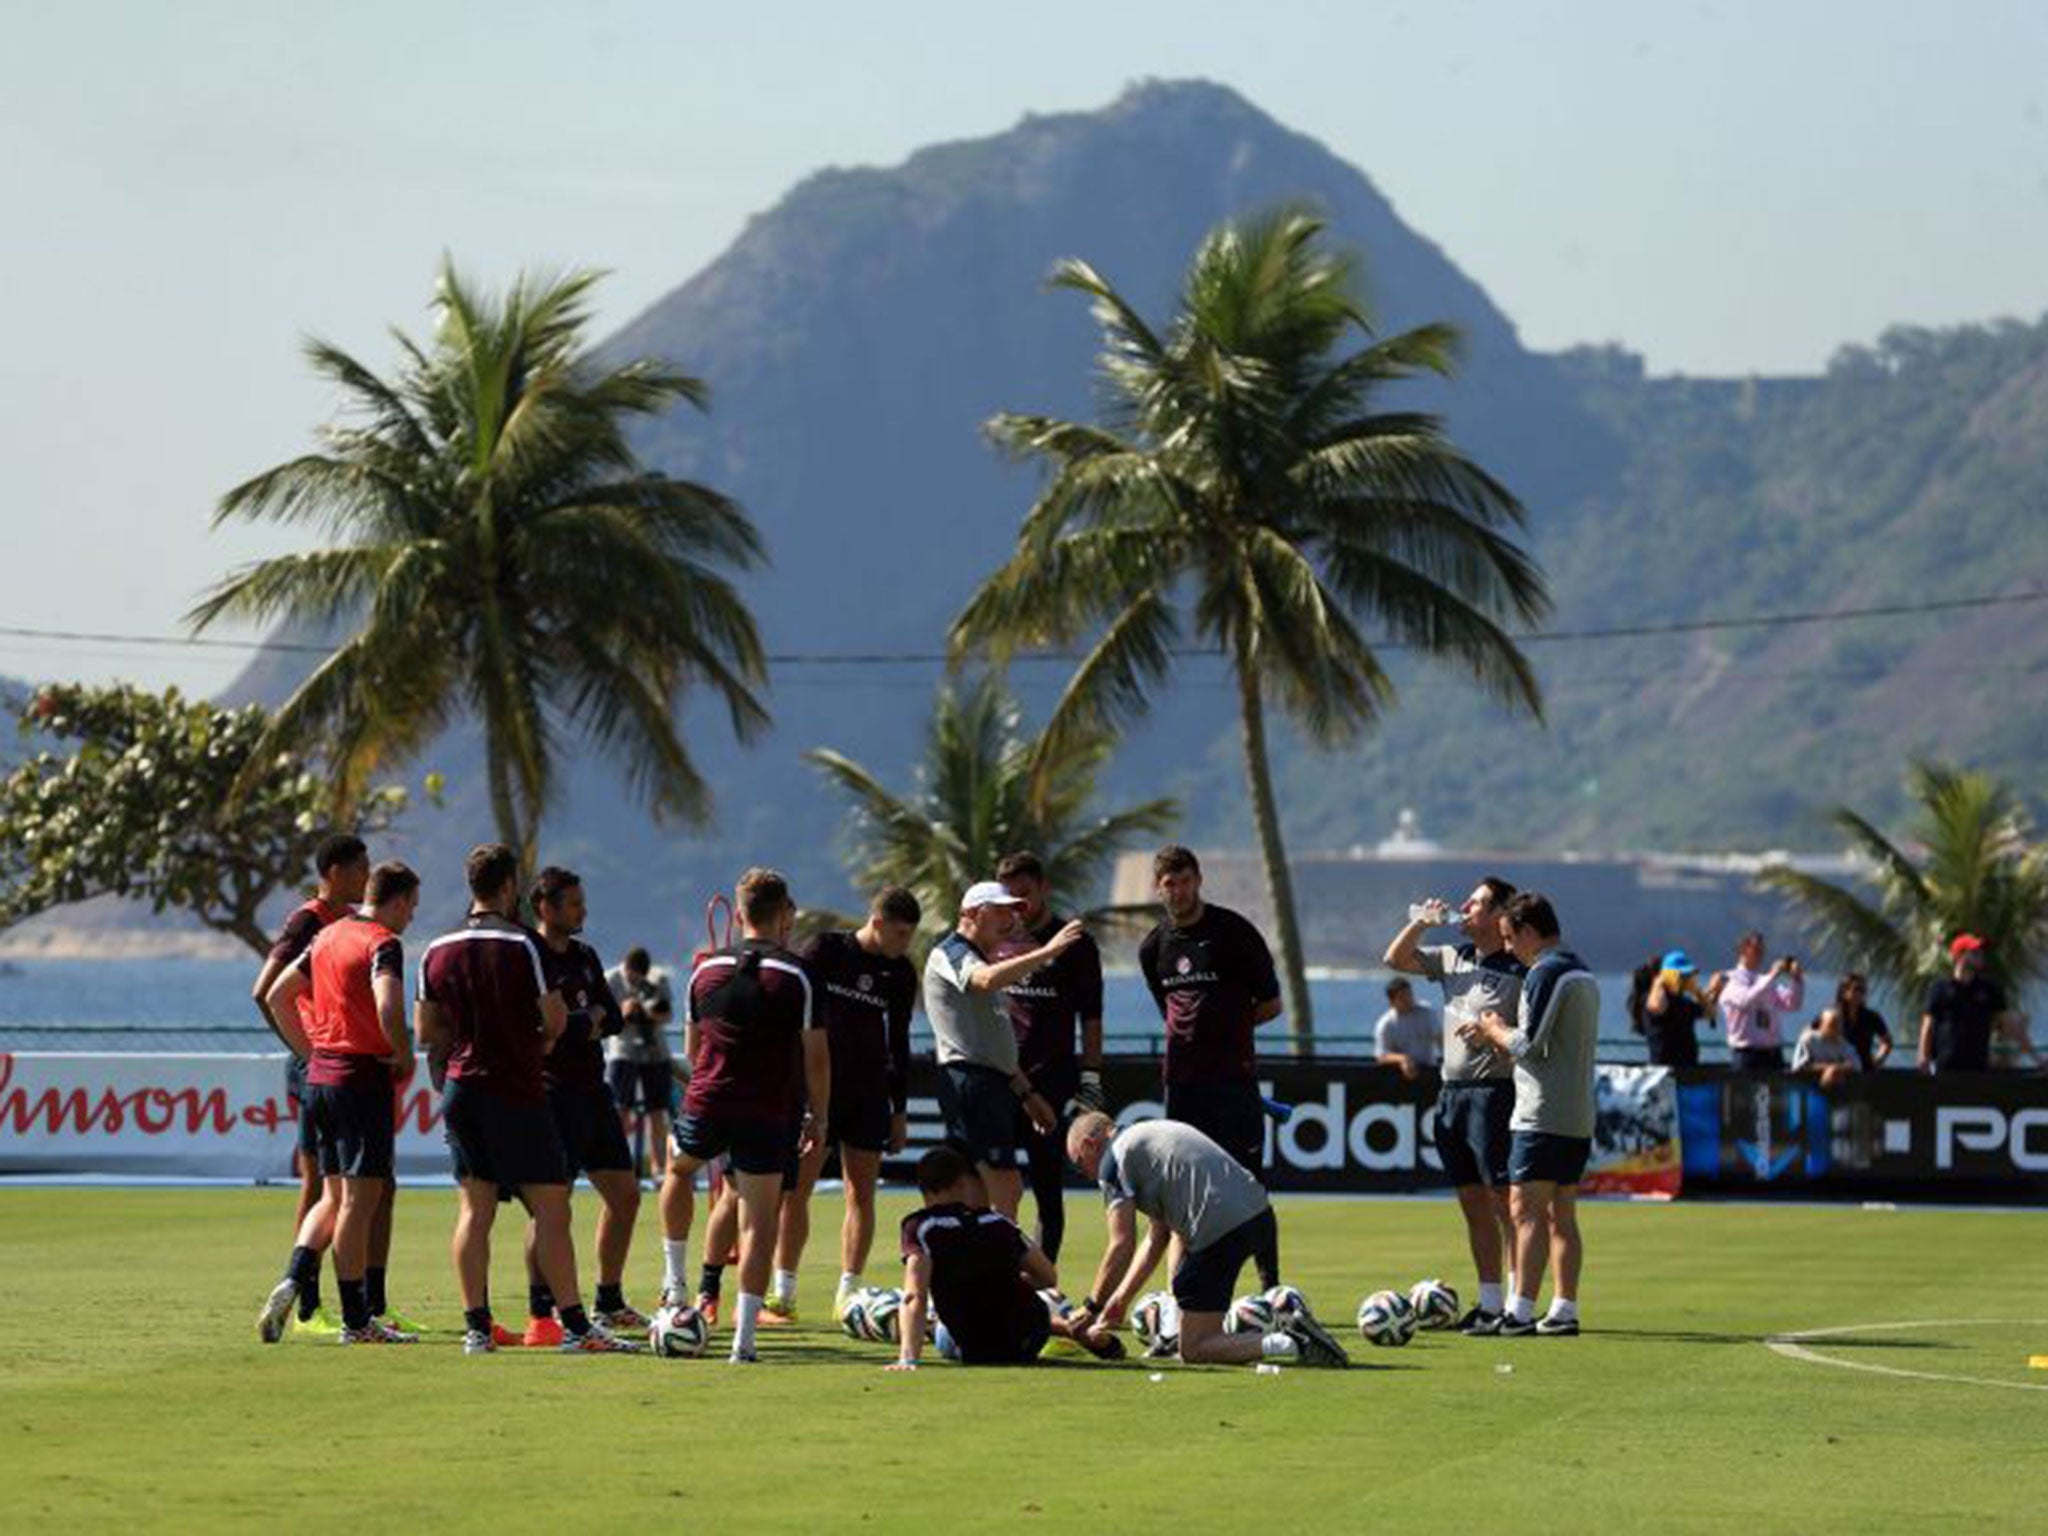 England training at the Urca military base in Rio